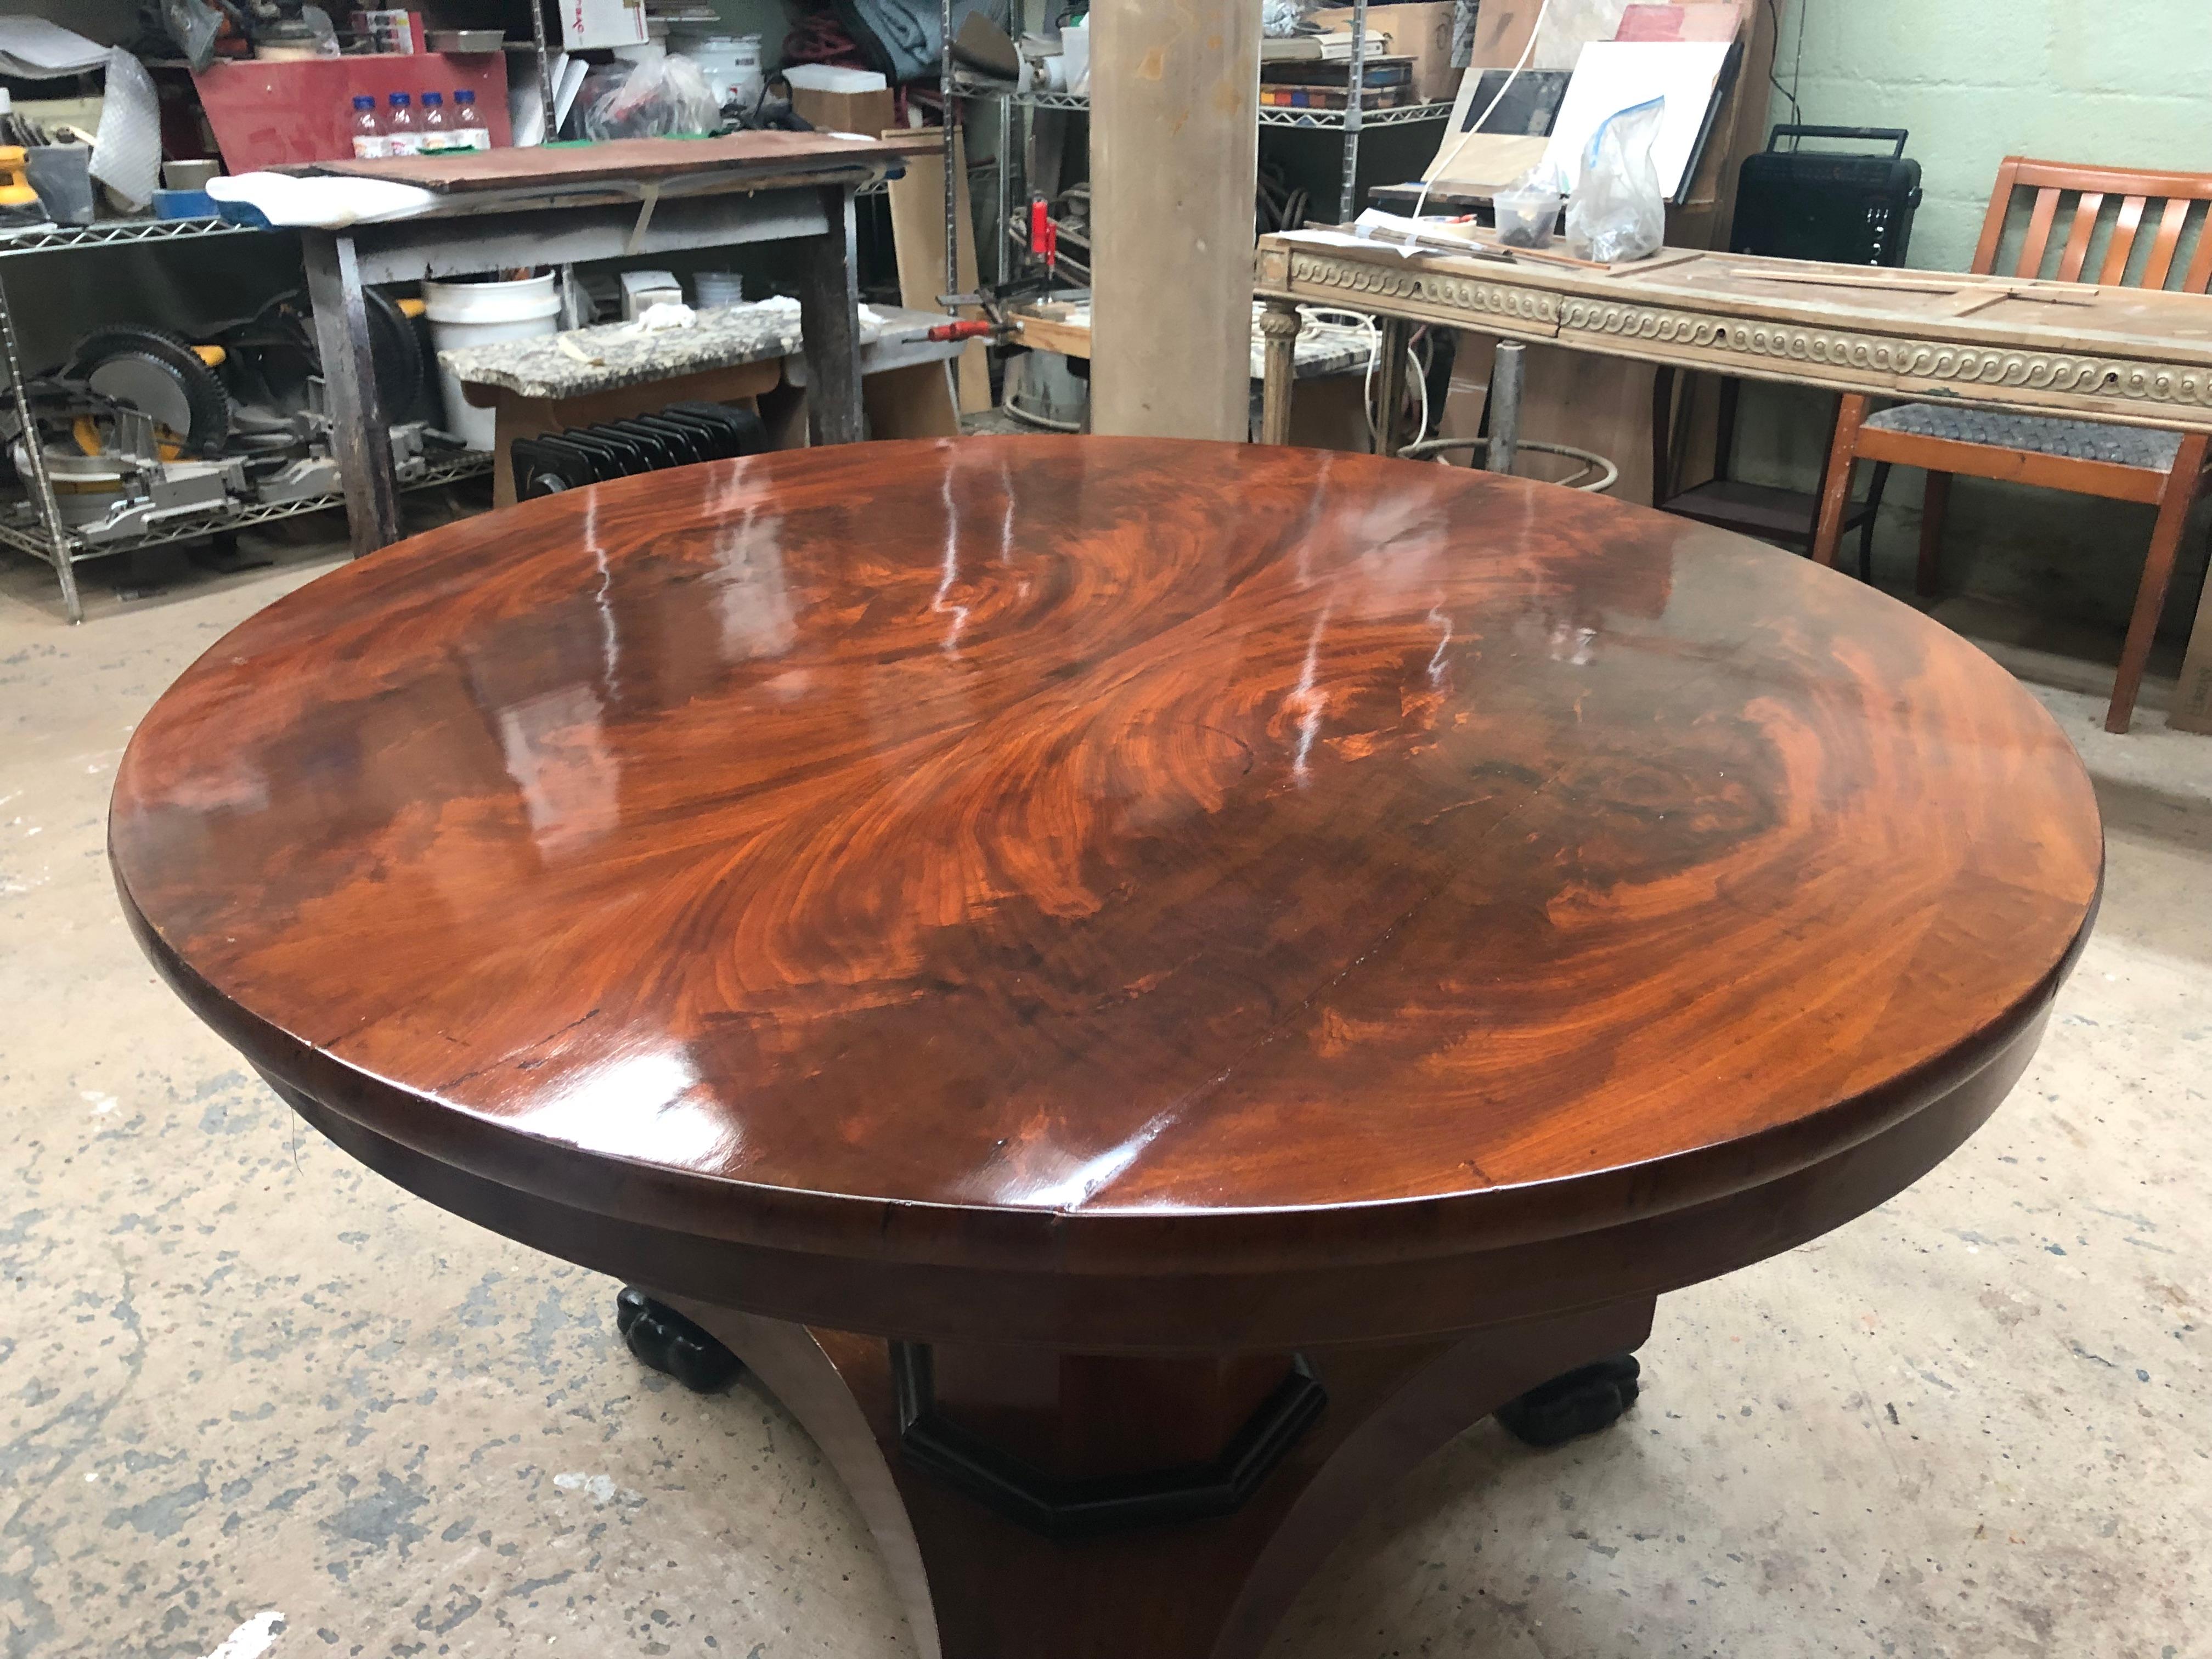 The round crotch mahogany top with apron can be lifted when not in use. The pedestal base with ebonized paw feet.